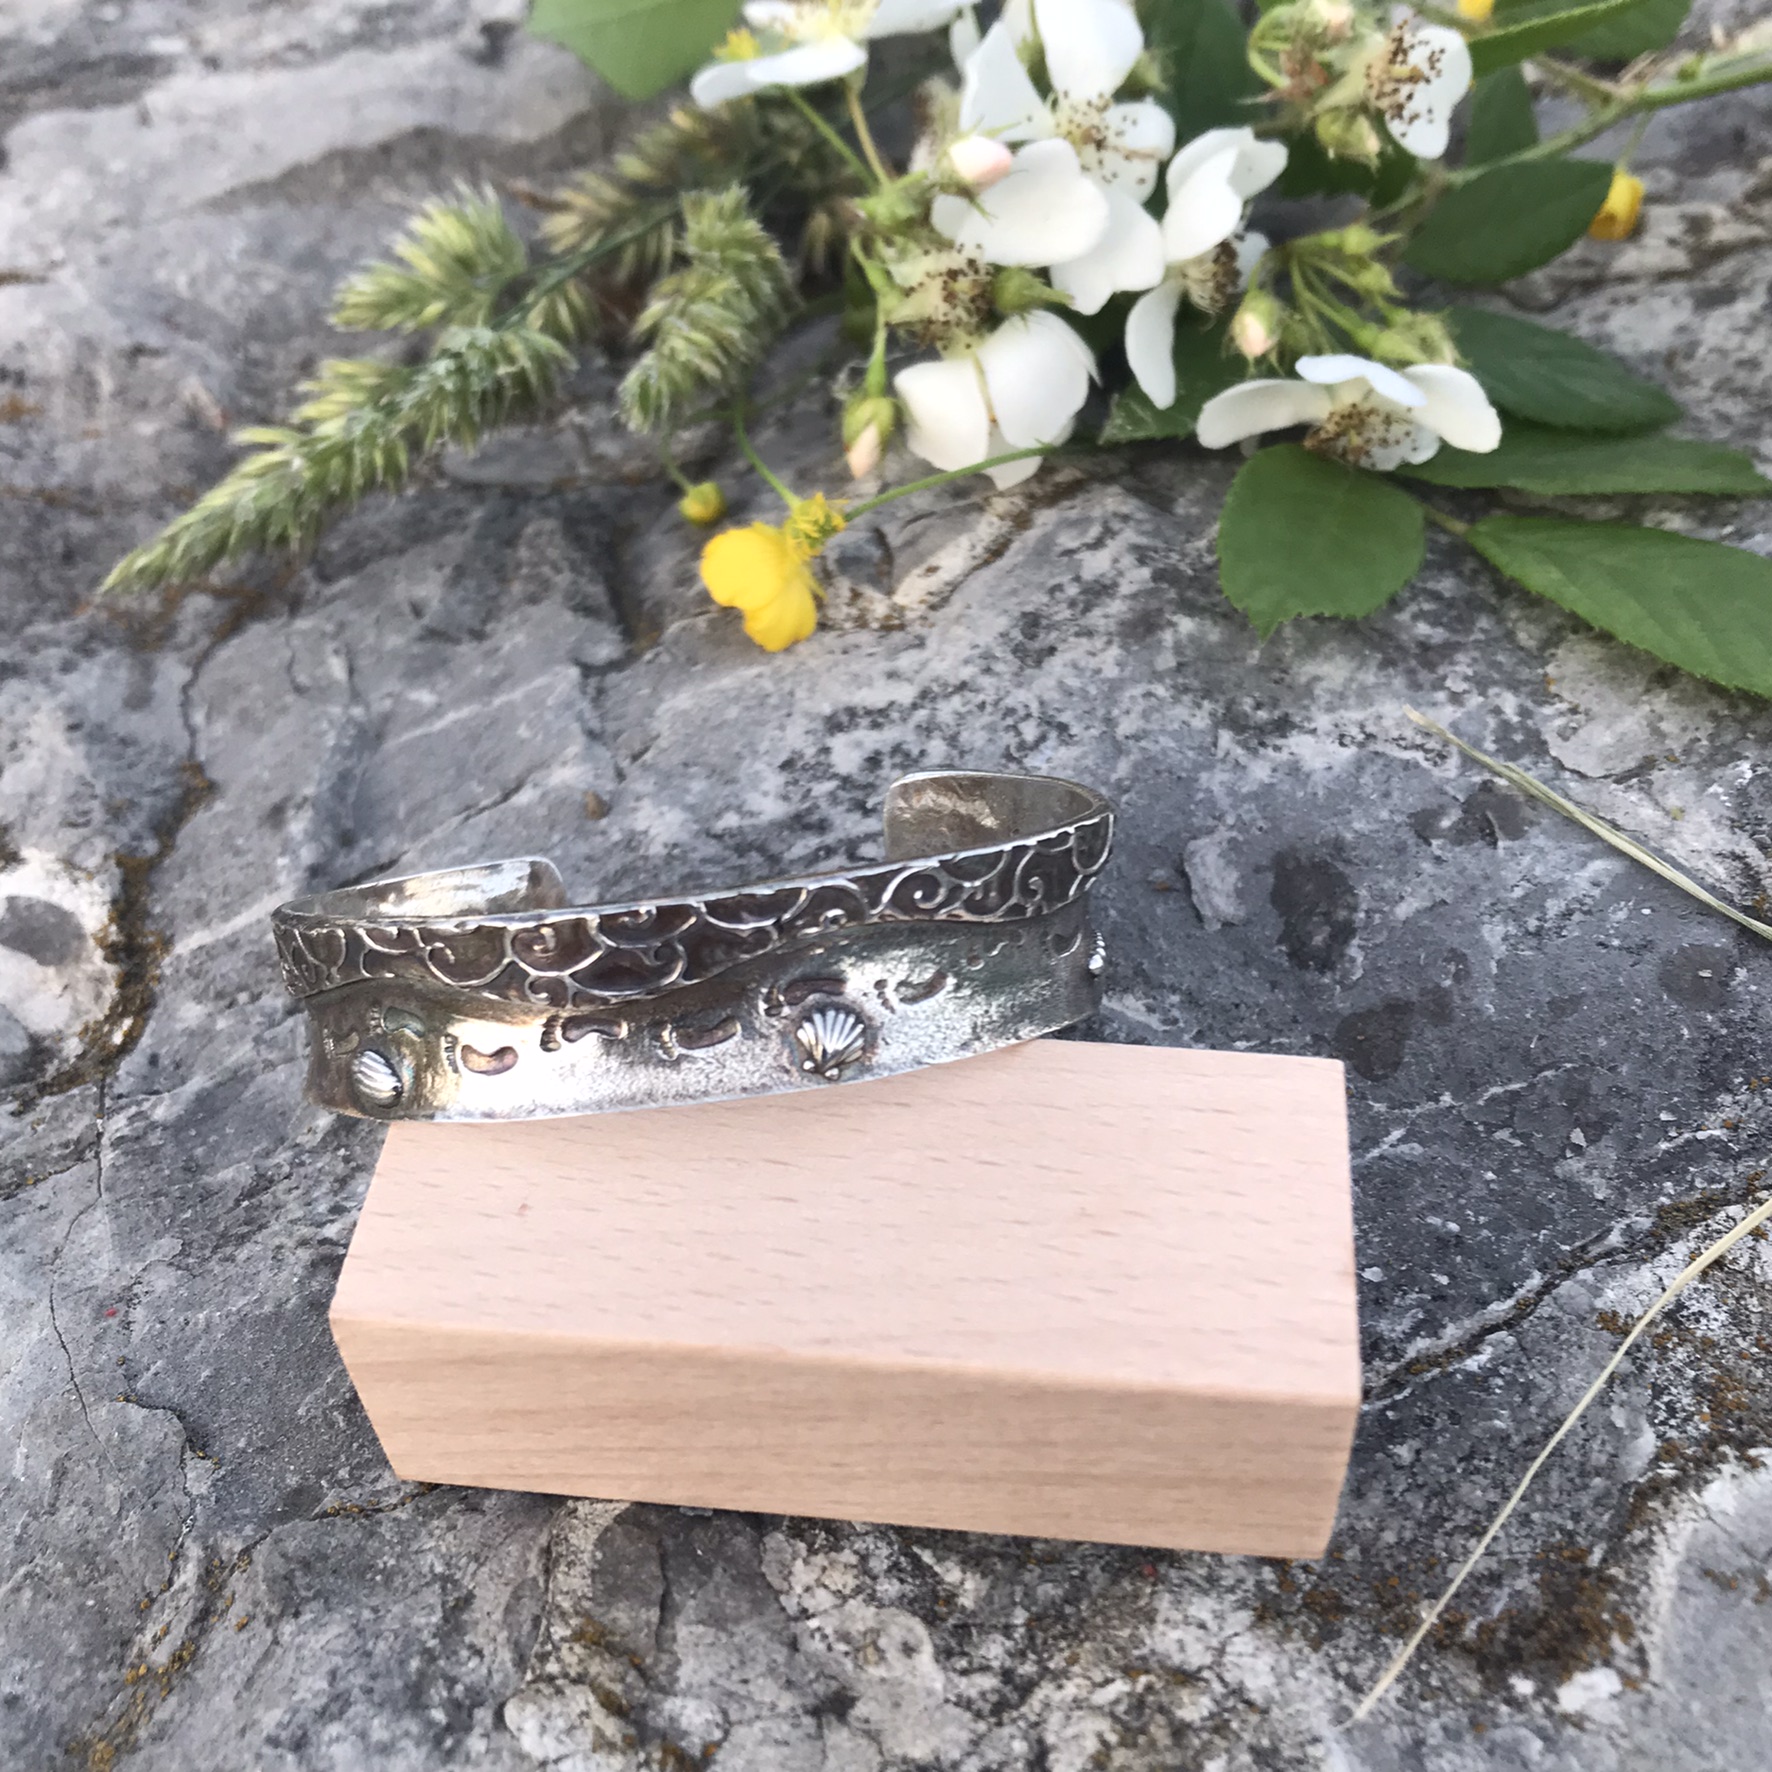 Never Alone Cuff Bracelet- 1/2 inch wide cuff bracelet created in sterling silver metal clay and showing a beach scene with water, shells and footprints in the sand propped on wooden block on rock